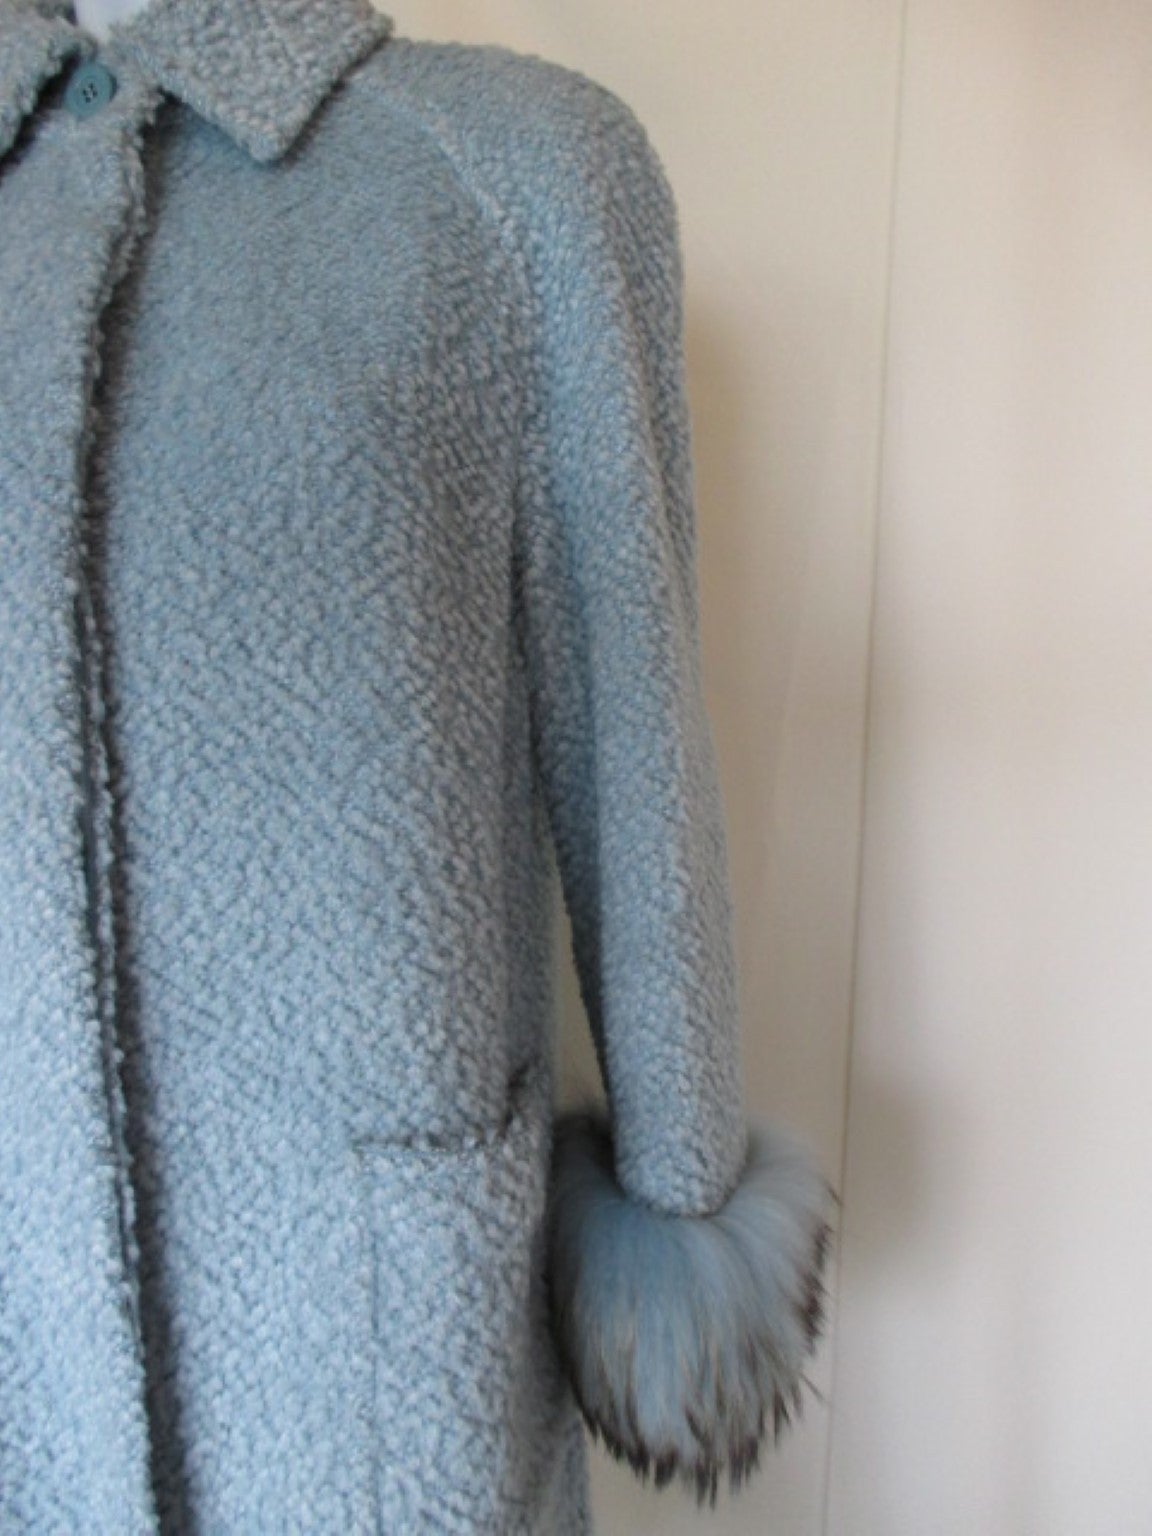 New Italian design Turquoise coat with fox fur details at the sleeves.

Size is 46 Italian but fits like EU 42/44 or US 12.